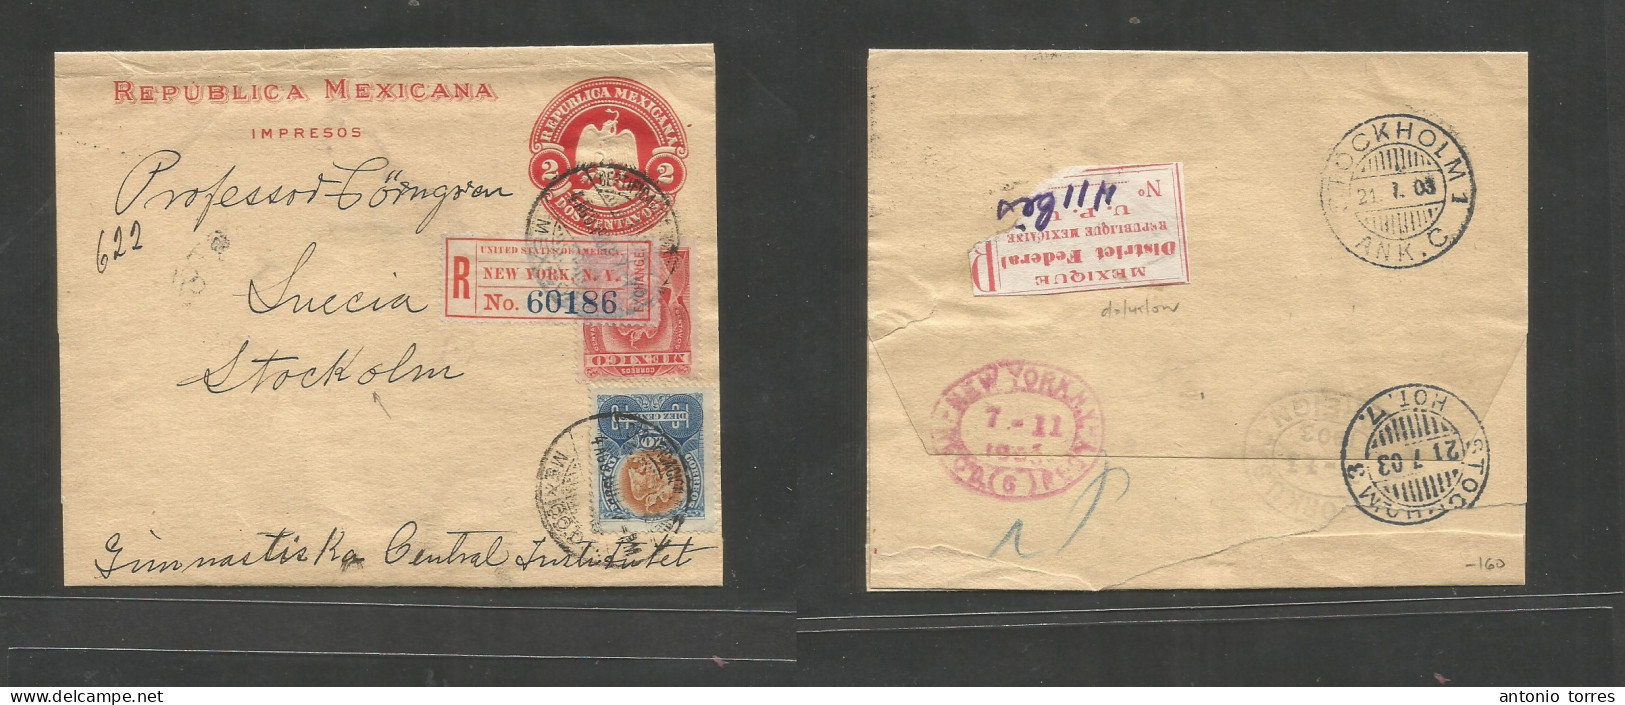 Mexico - Stationery. 1903 (4 Aug) DF - Sweden, Stockholm (21 July 03) Via NYC. Registered 2c Red Complete Stat Wrapper + - Mexico